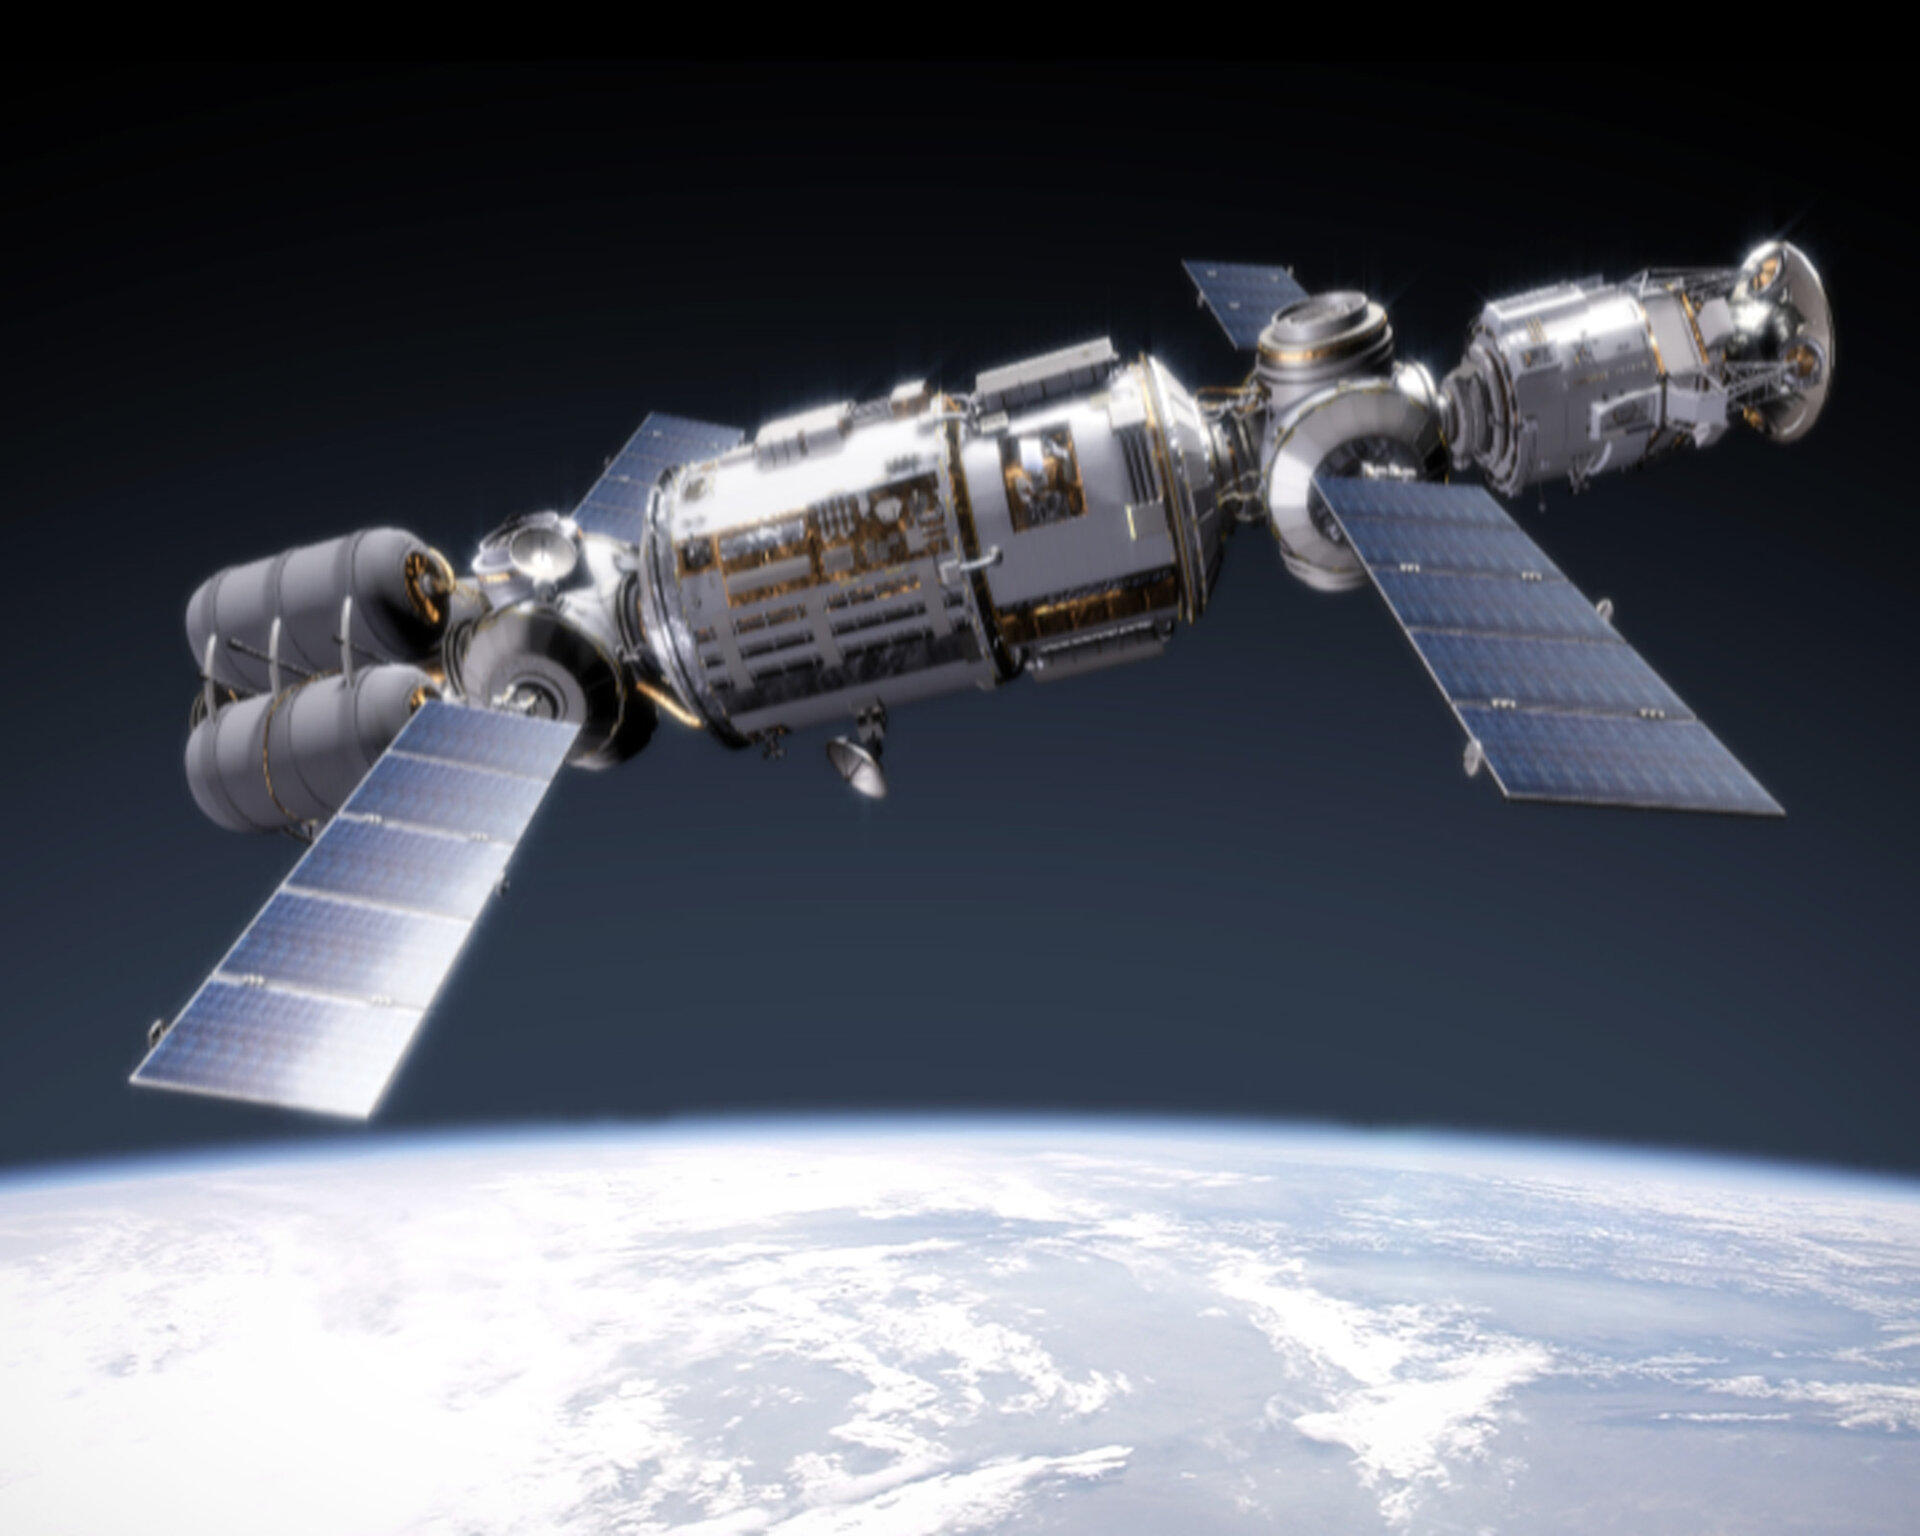 In-orbit assembly around the Earth will play an important role in the future exploration plans